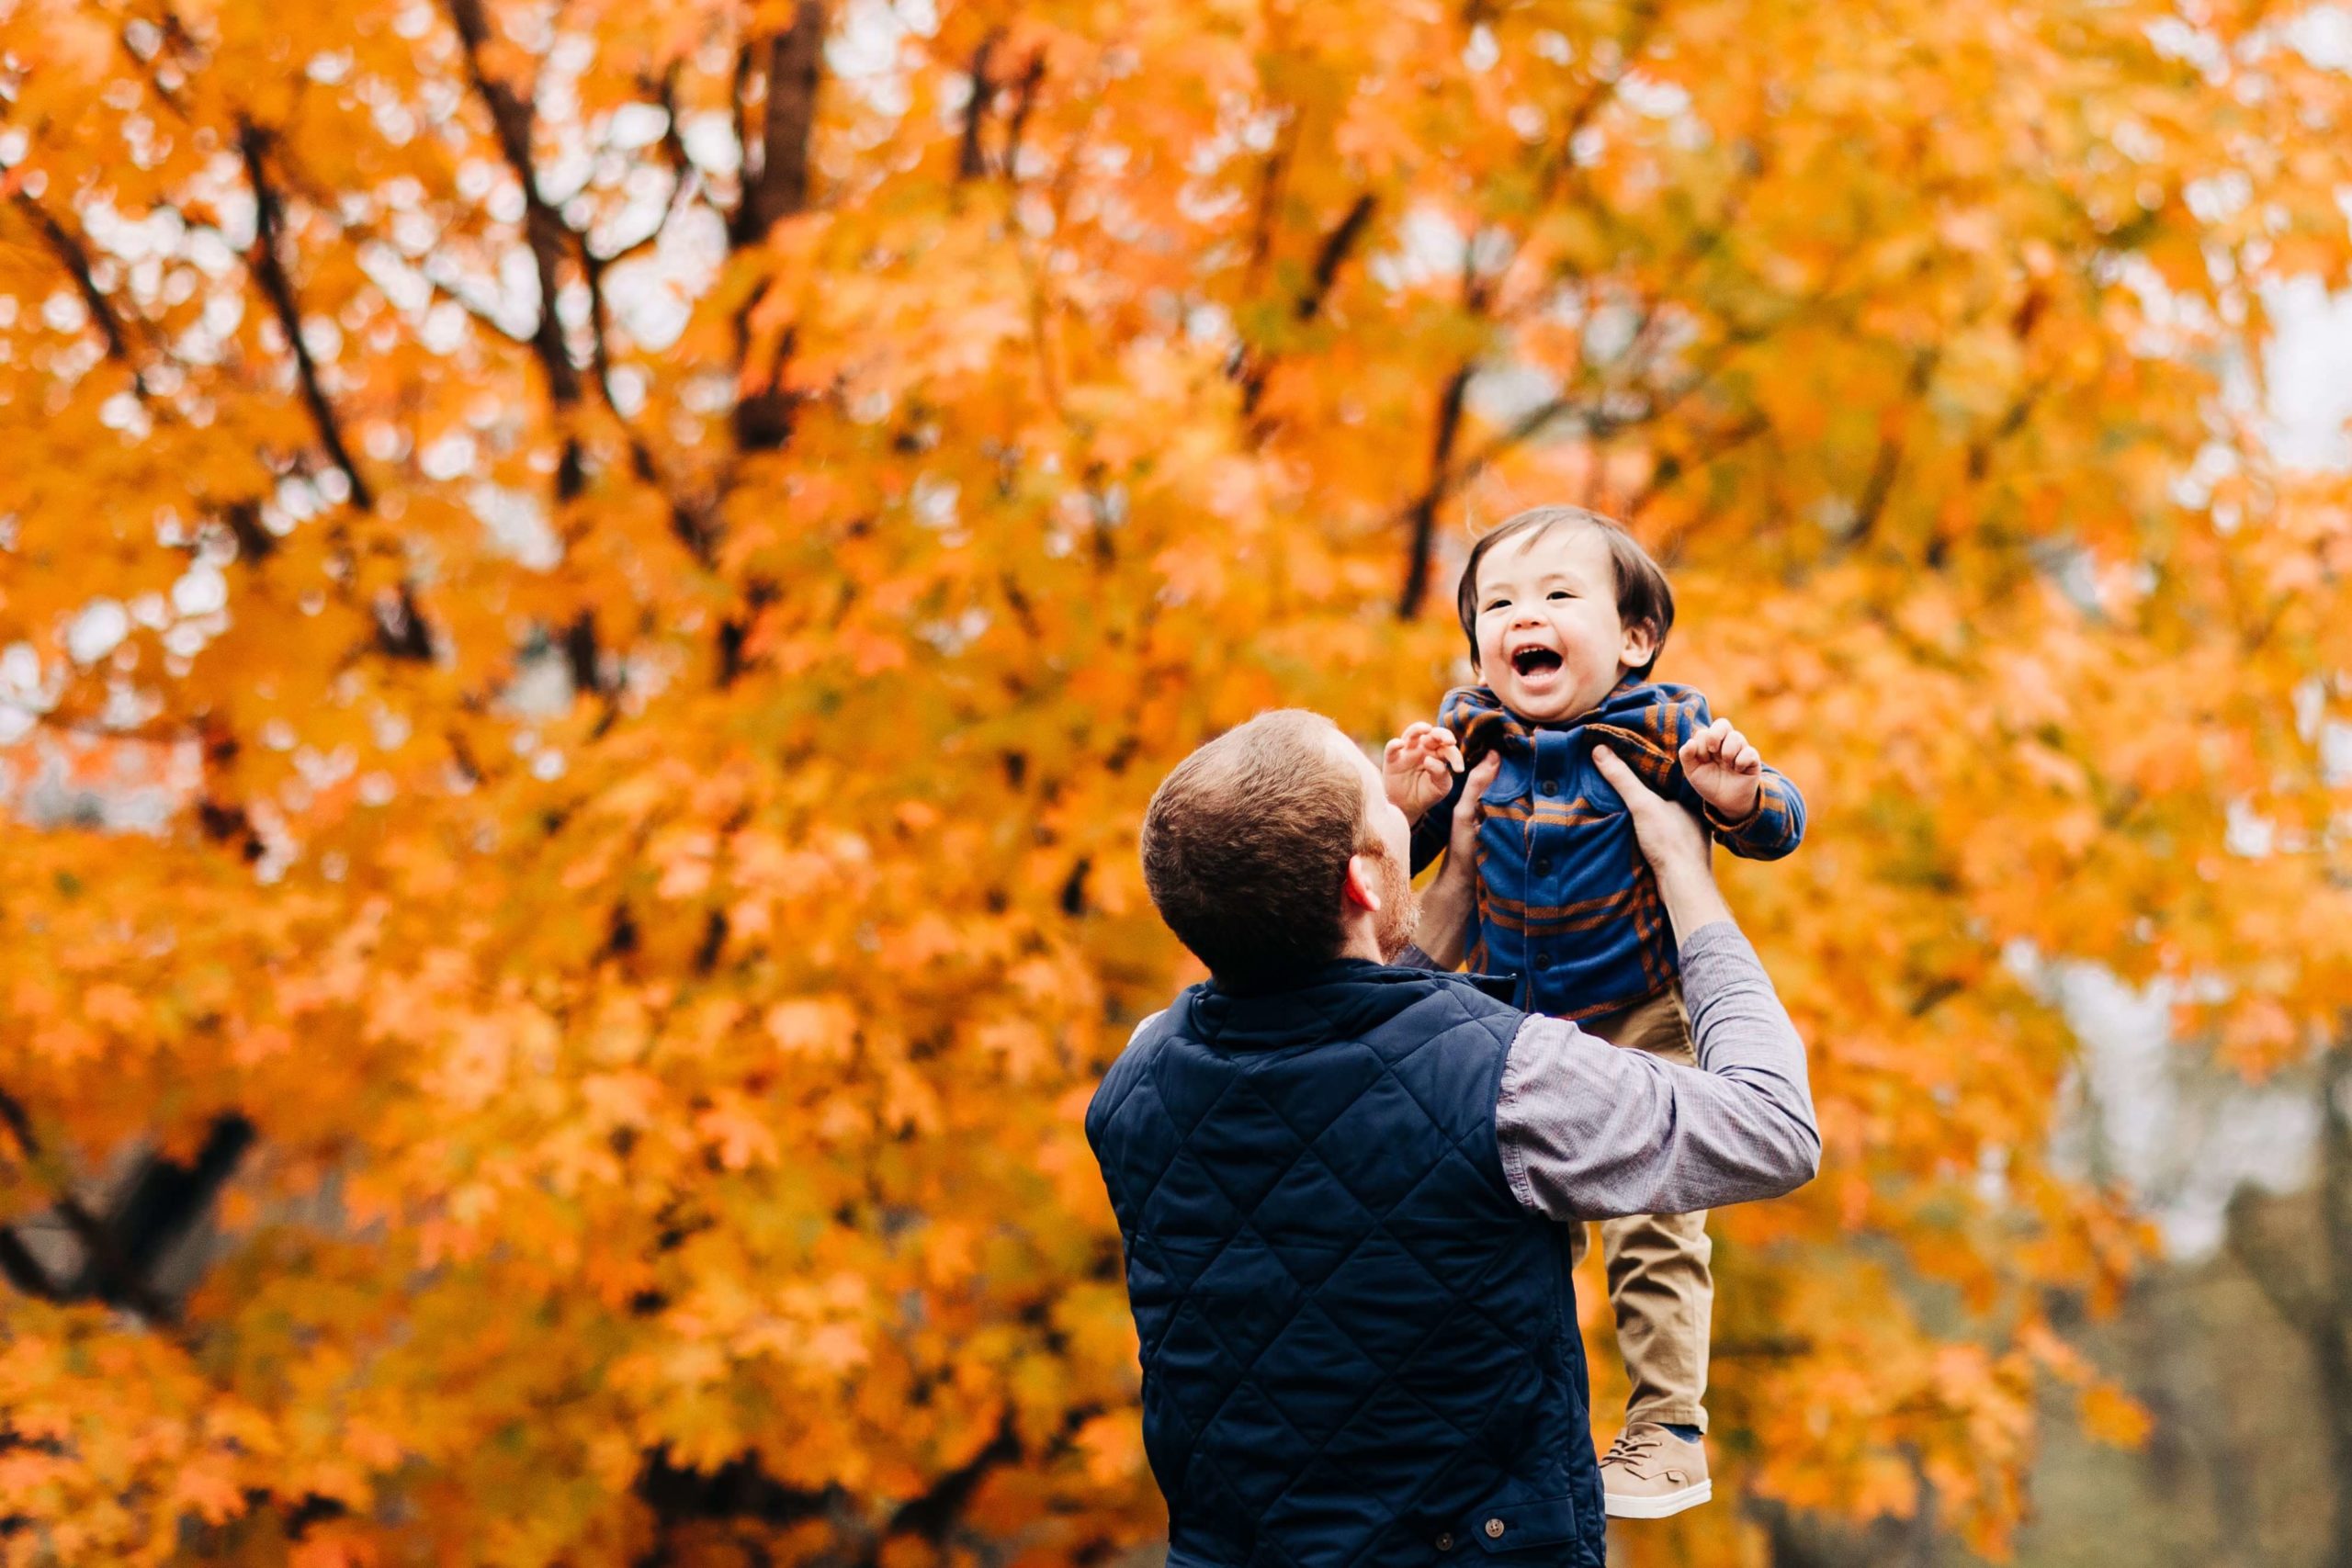 baby laughing, orange tree in the fall, dad lifting baby up